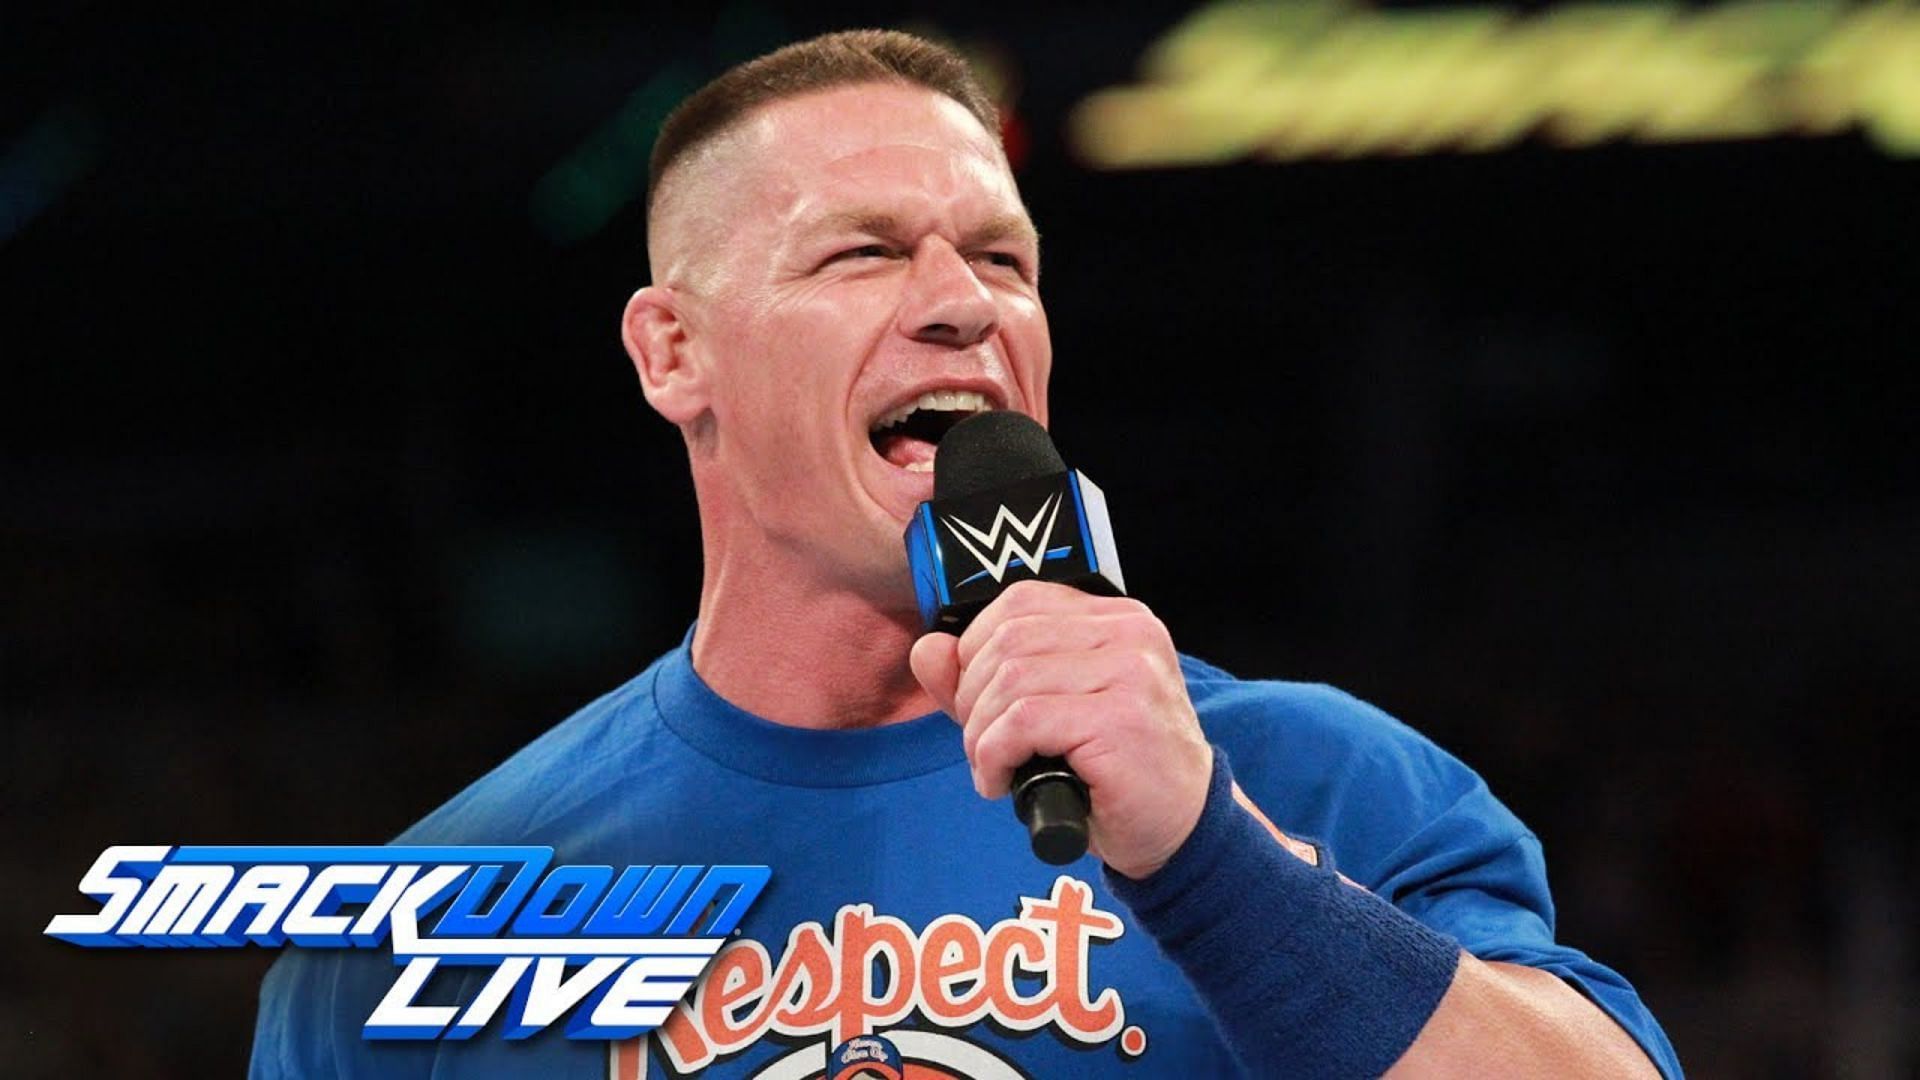 Who could surprise John Cena on WWE Smackdown?